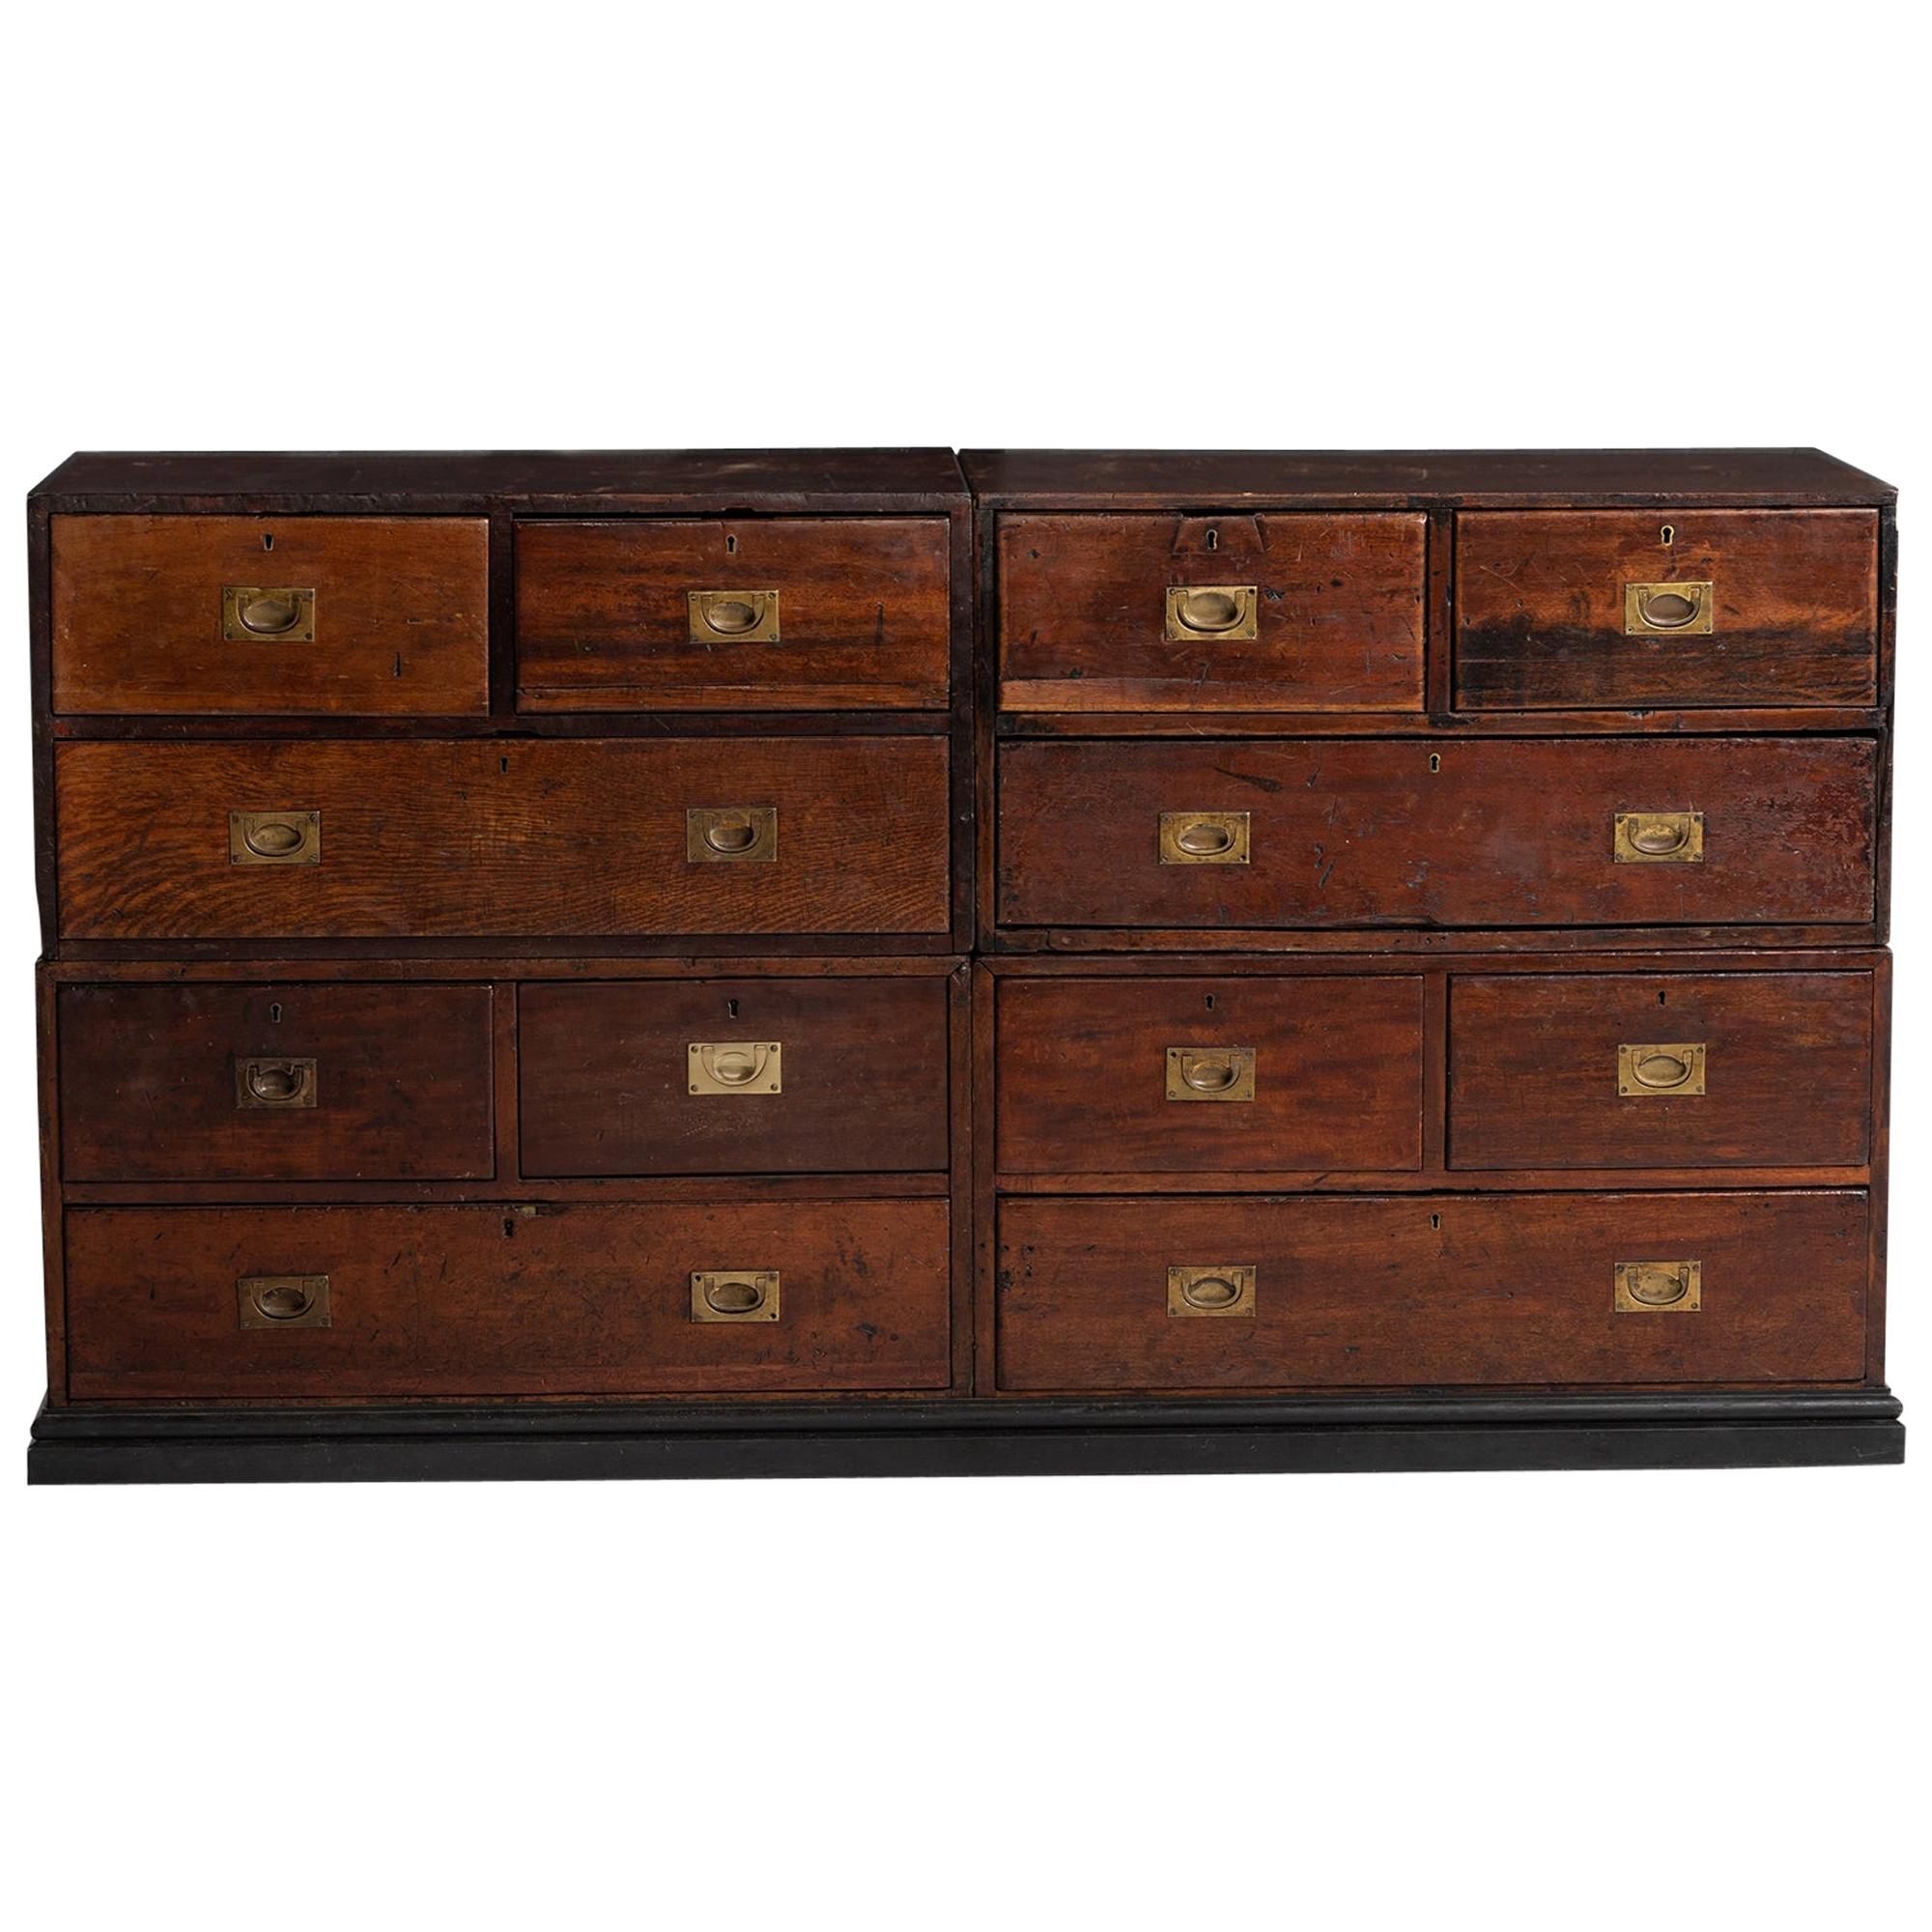 Military Bank of Drawers